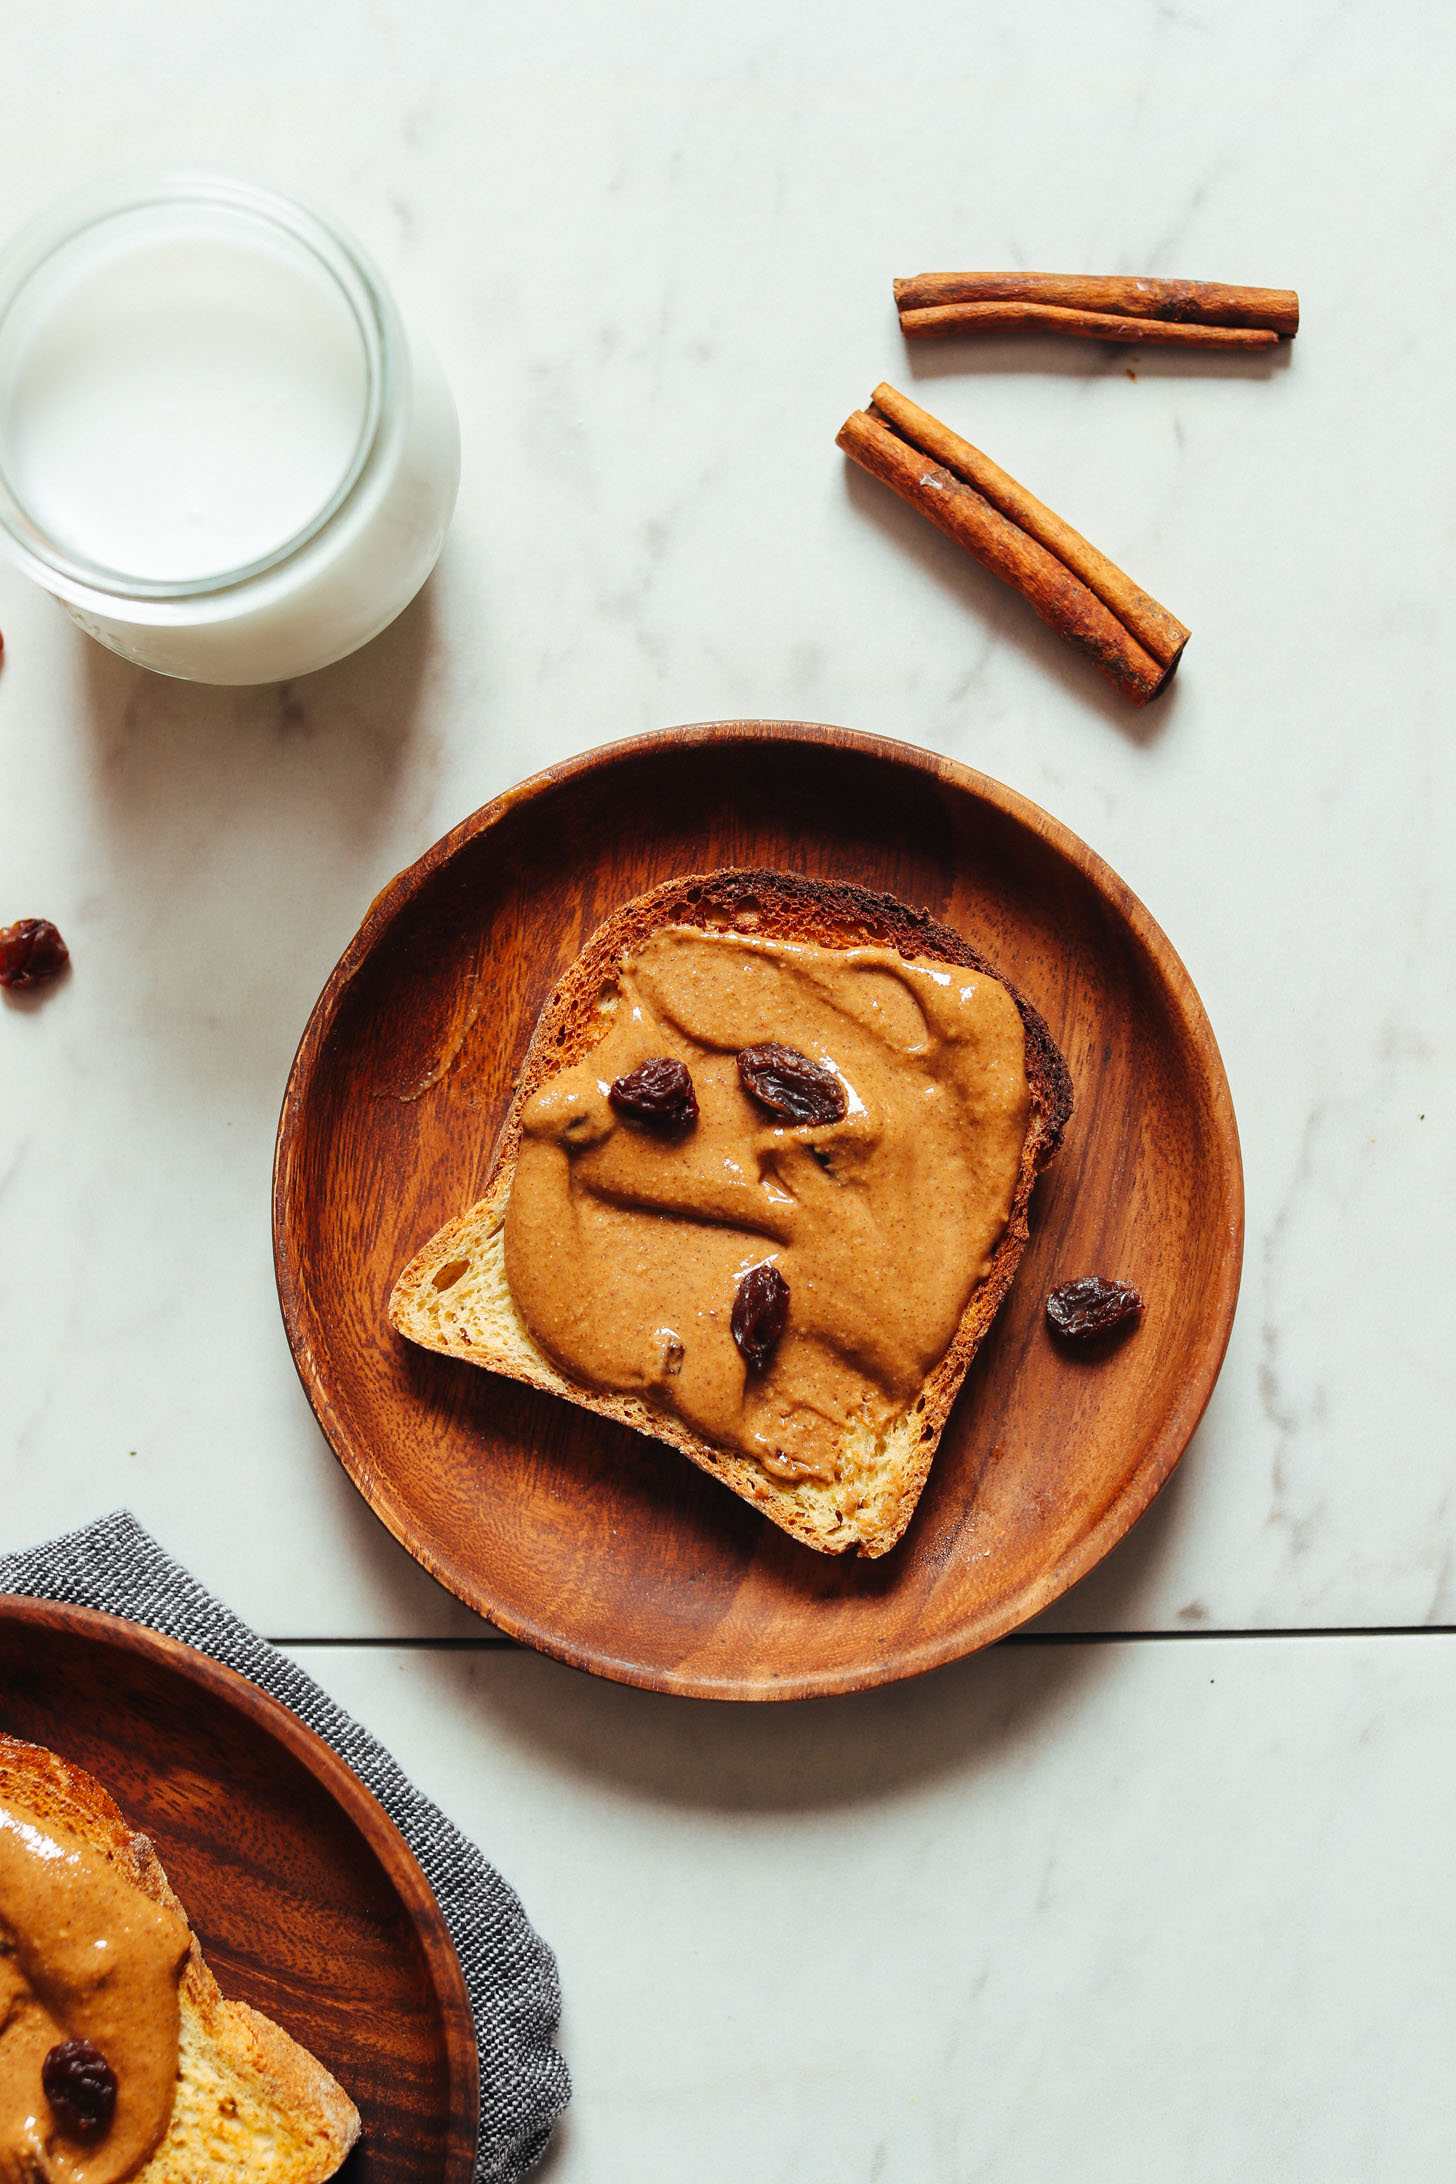 Slice of gluten-free toast smothered with delicious Cinnamon Raisin Peanut Butter for a healthy plant-based breakfast